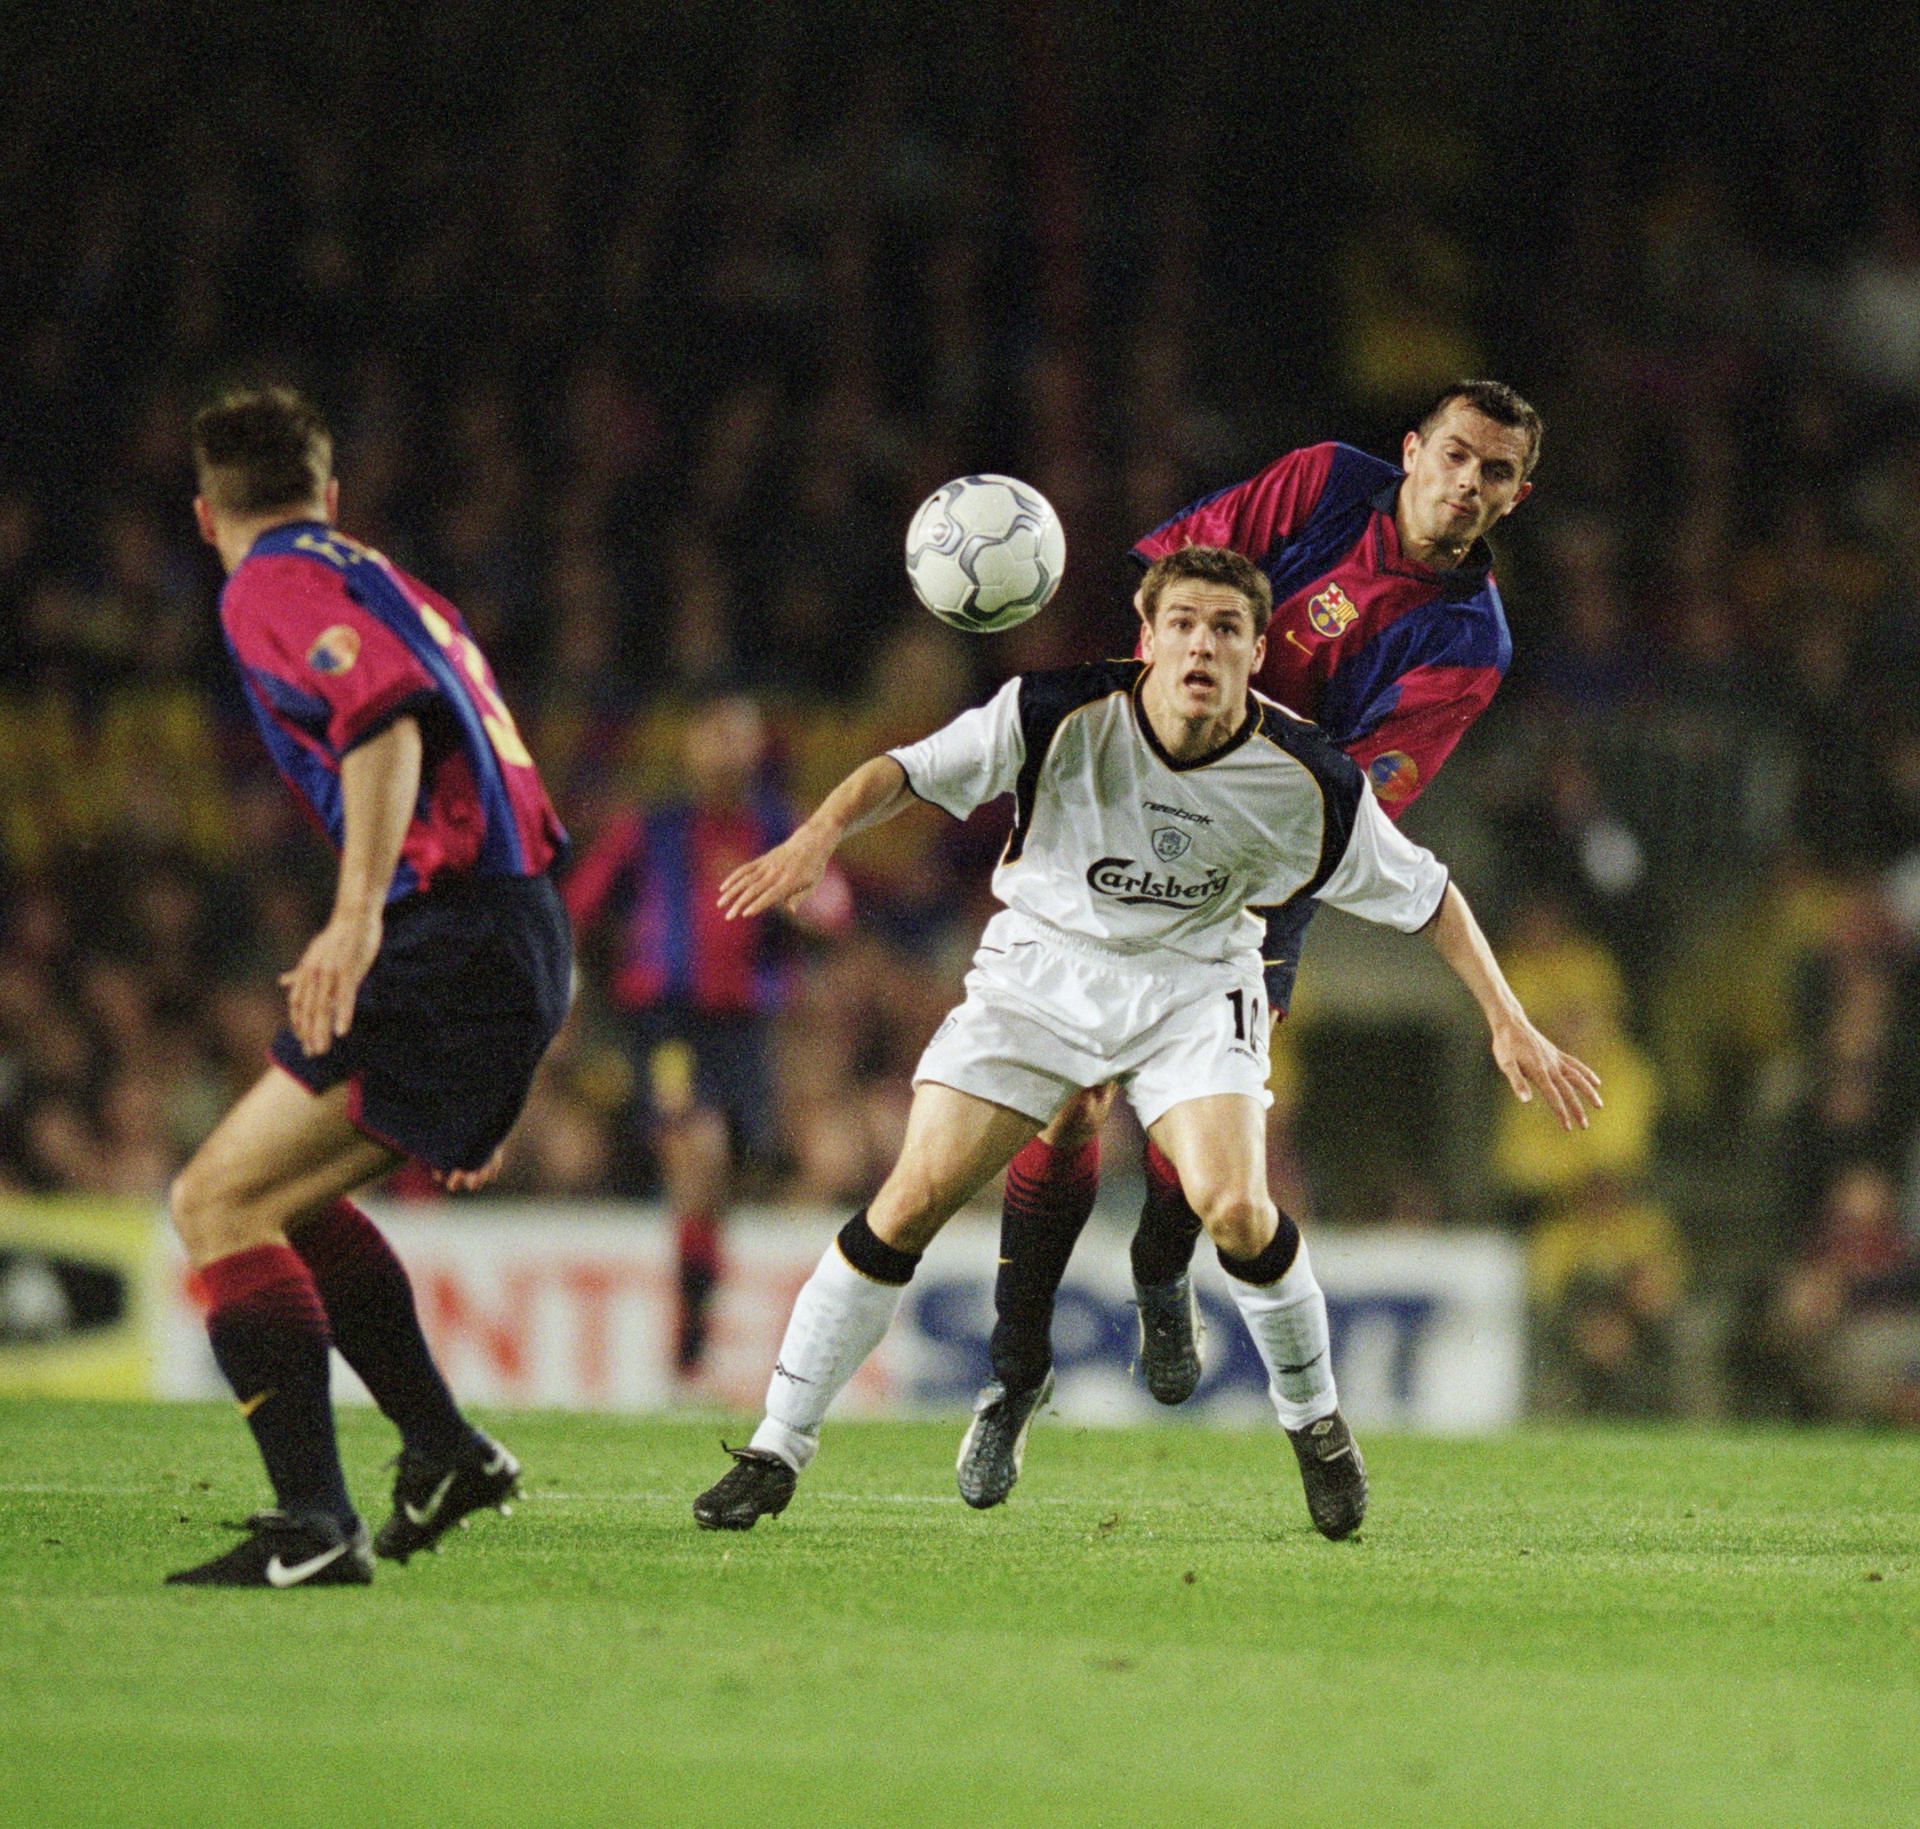 Phillip Cocu (right) tussles for the ball with Michael Owen (centre).